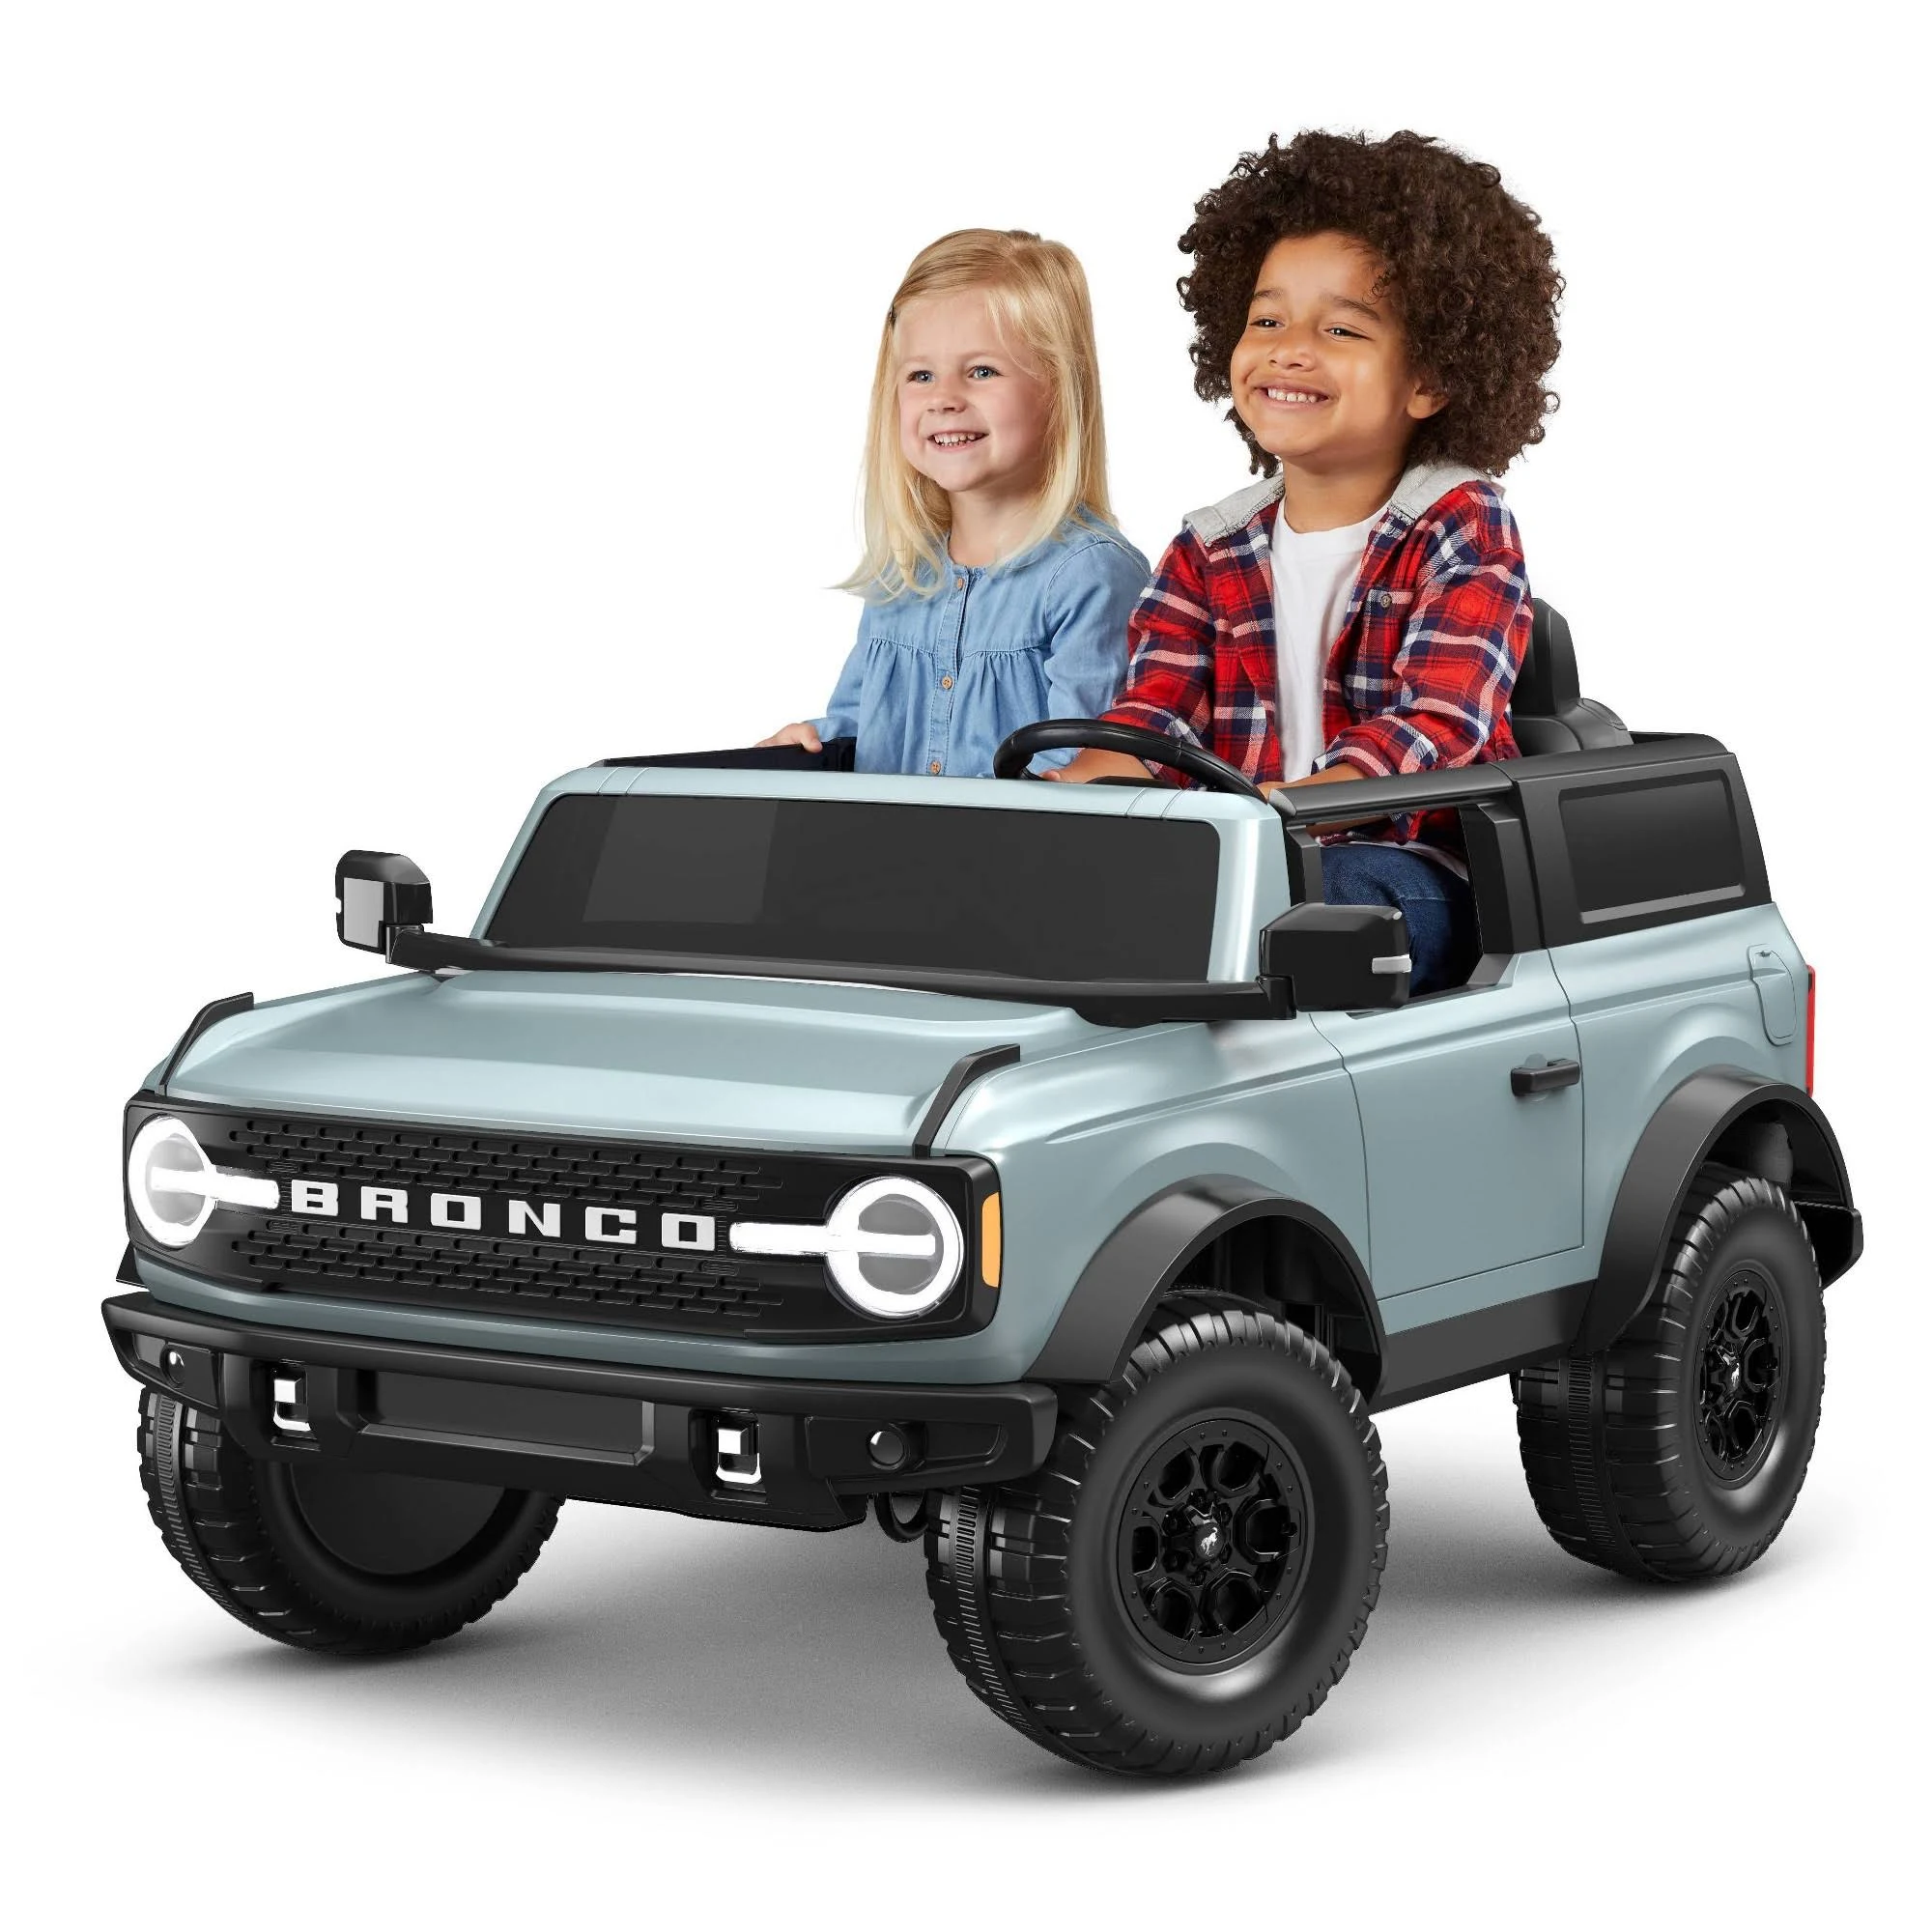 Kid Trax 12V Ford Bronco Battery Powered Ride on